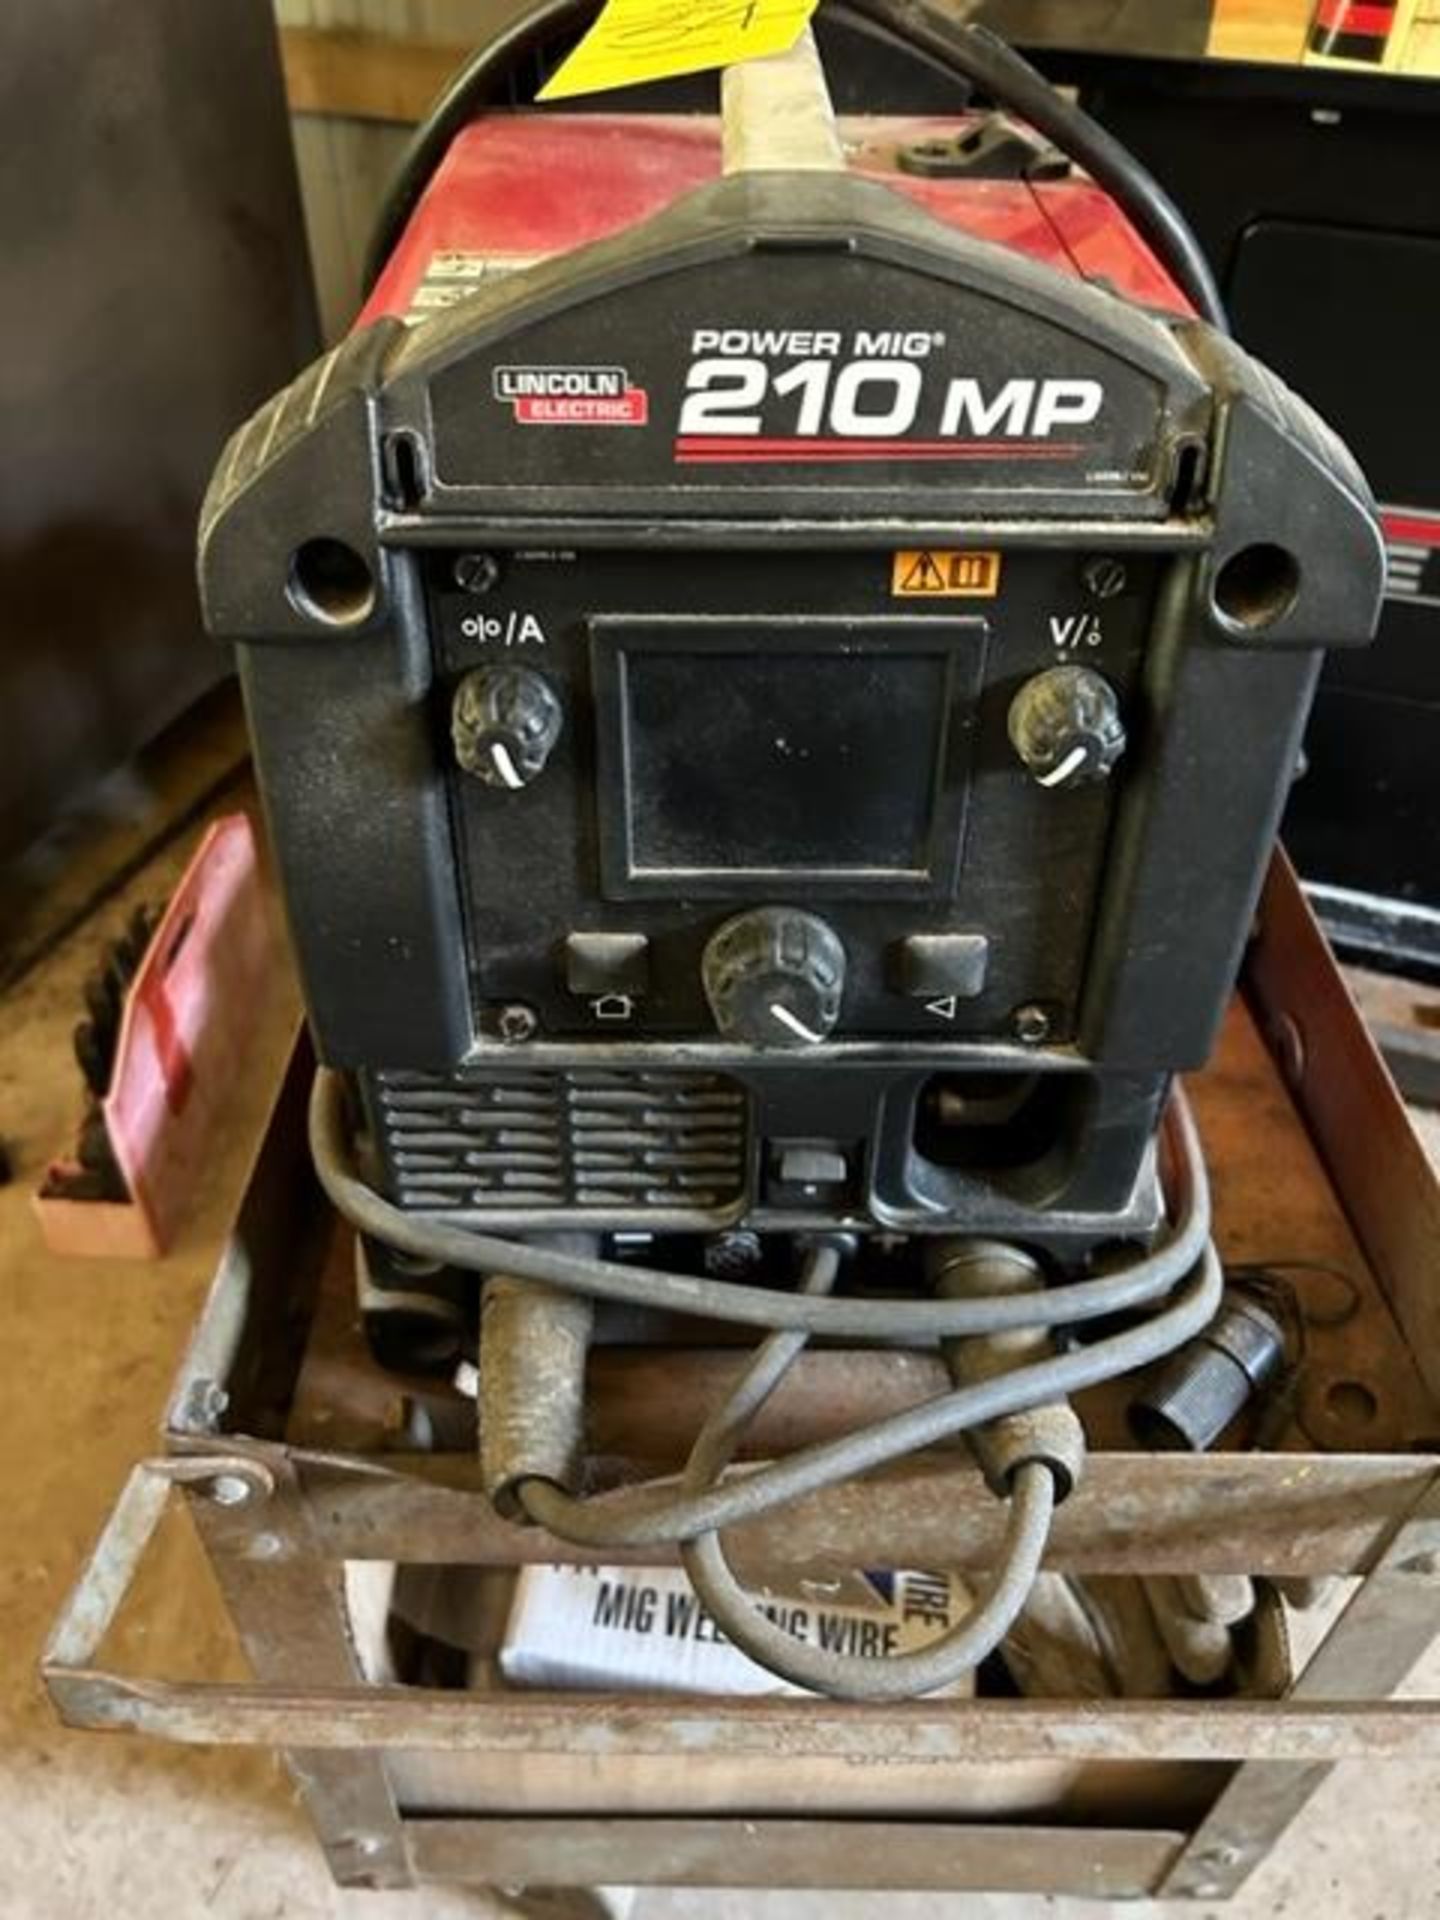 Lincoln Electric Power Mig 210MP Welder